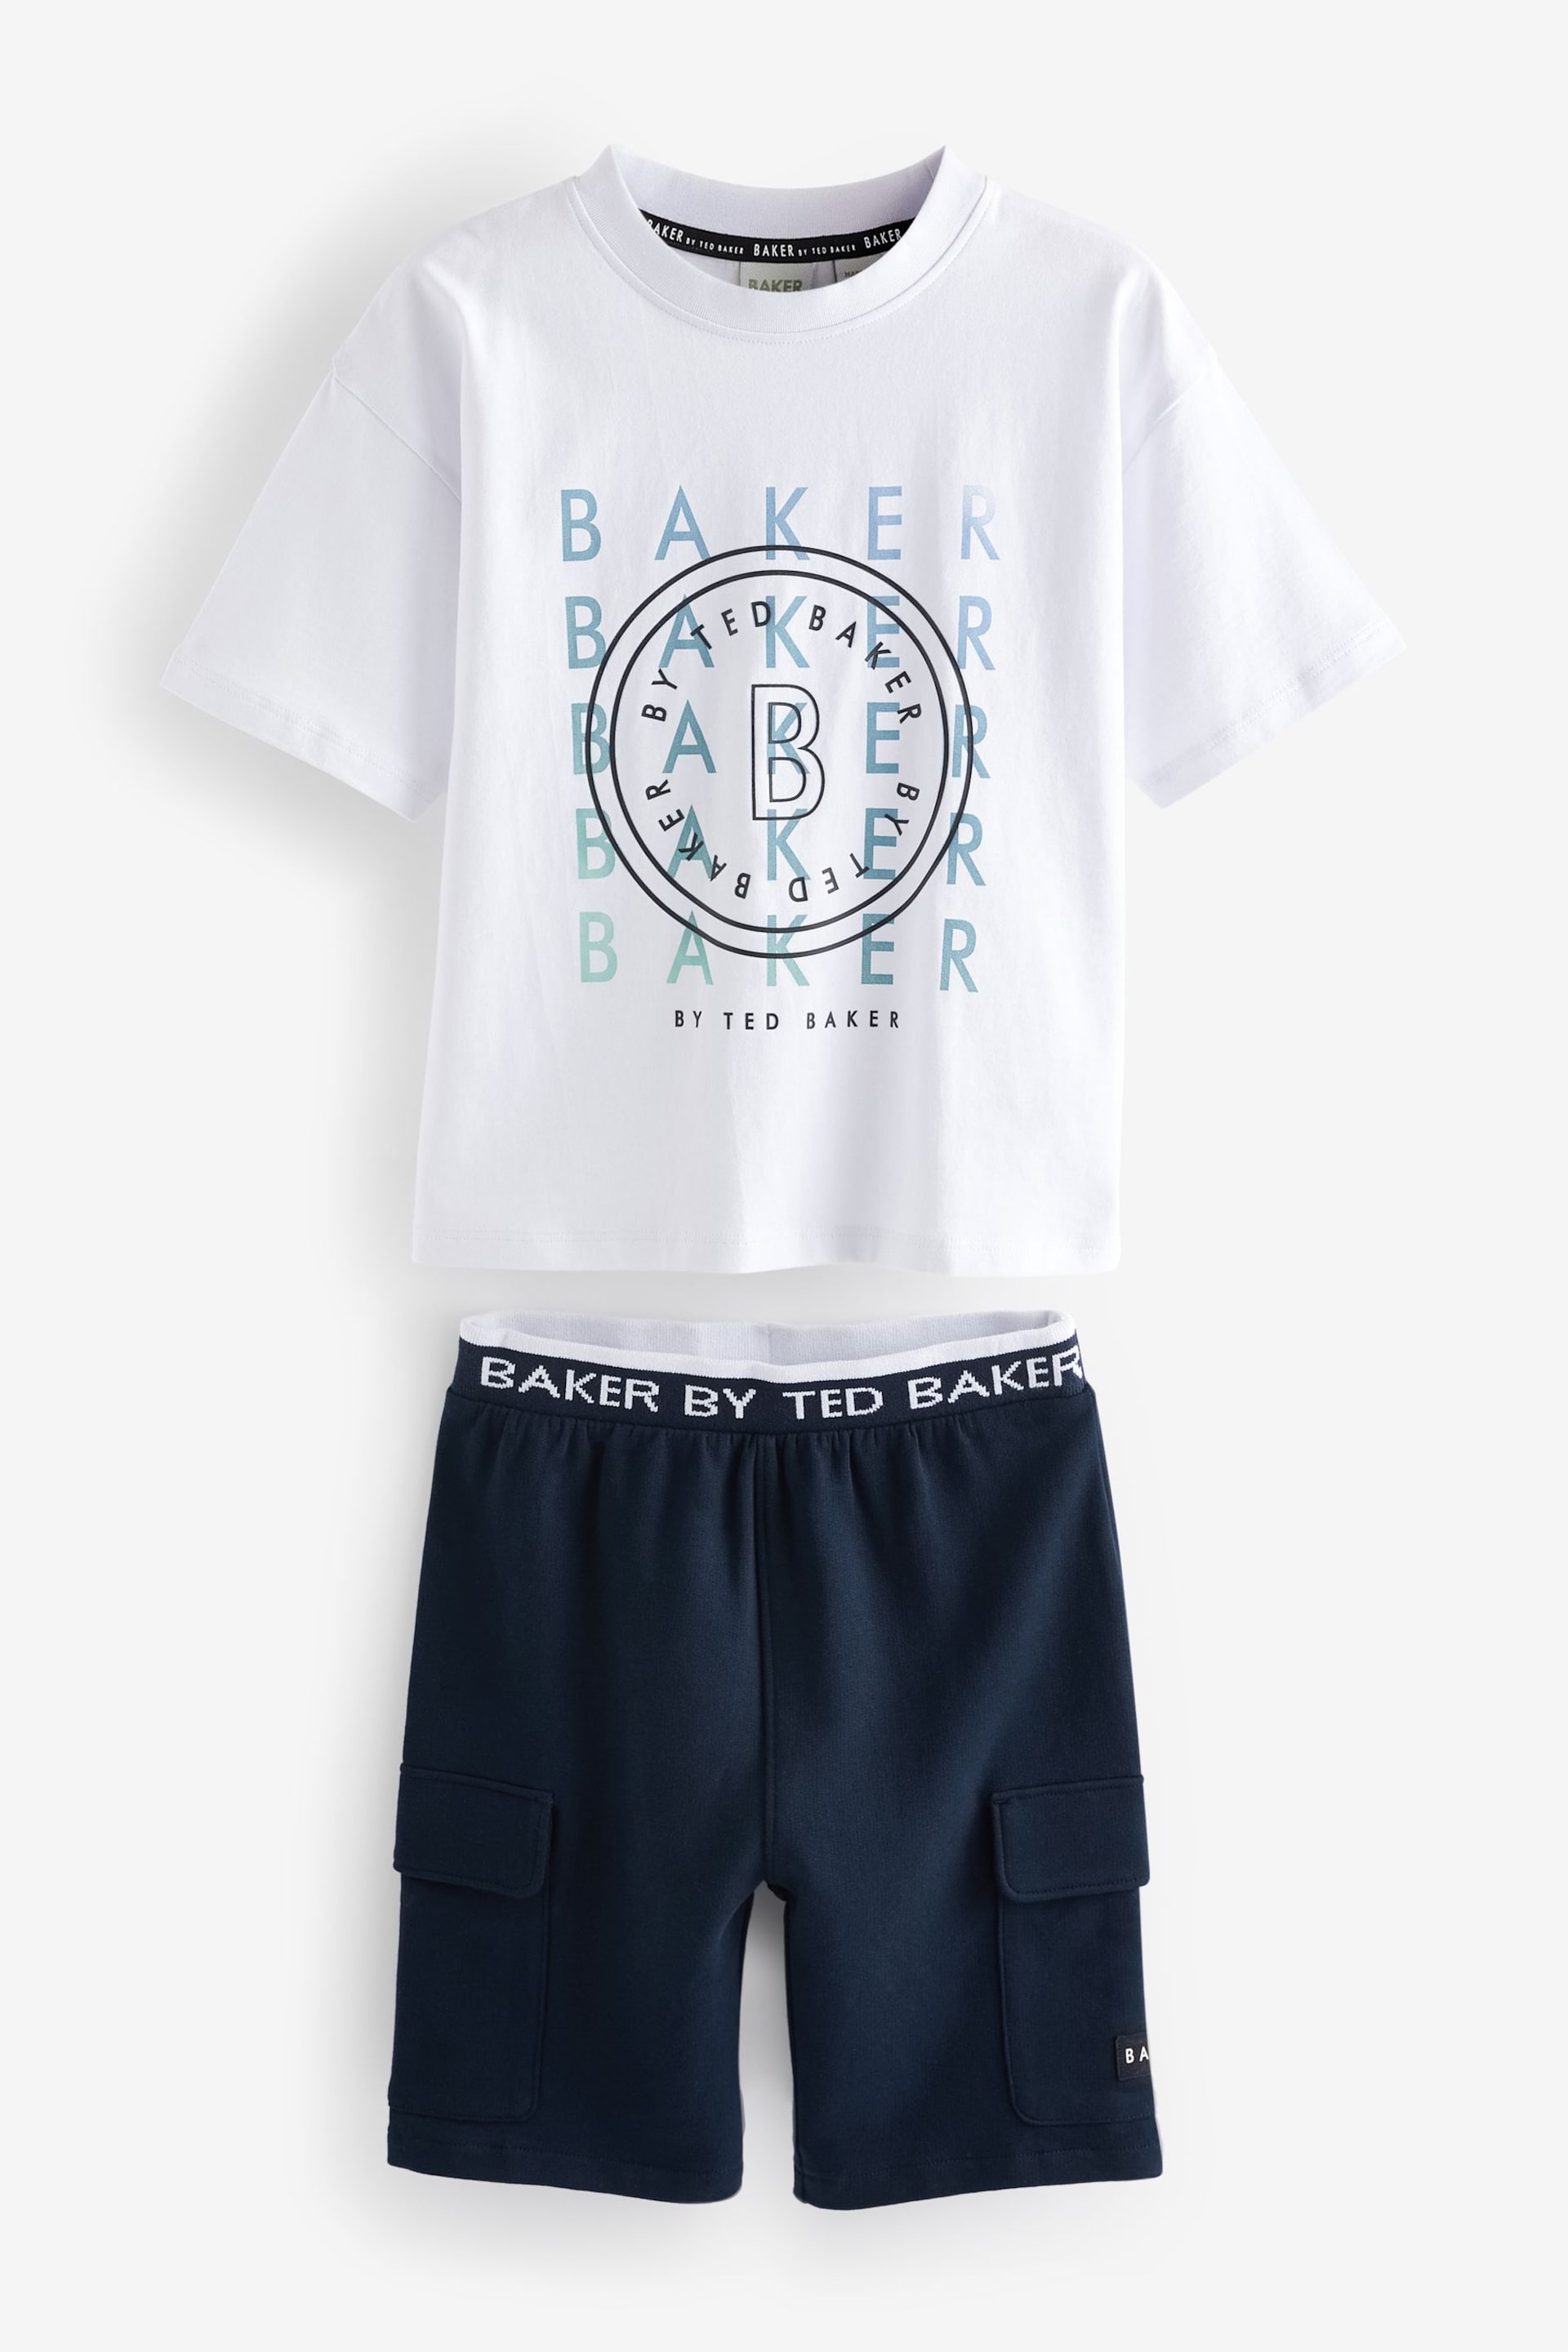 Baker by Ted Baker Navy Graphic T-Shirt And Navy Shorts Set - Image 6 of 8